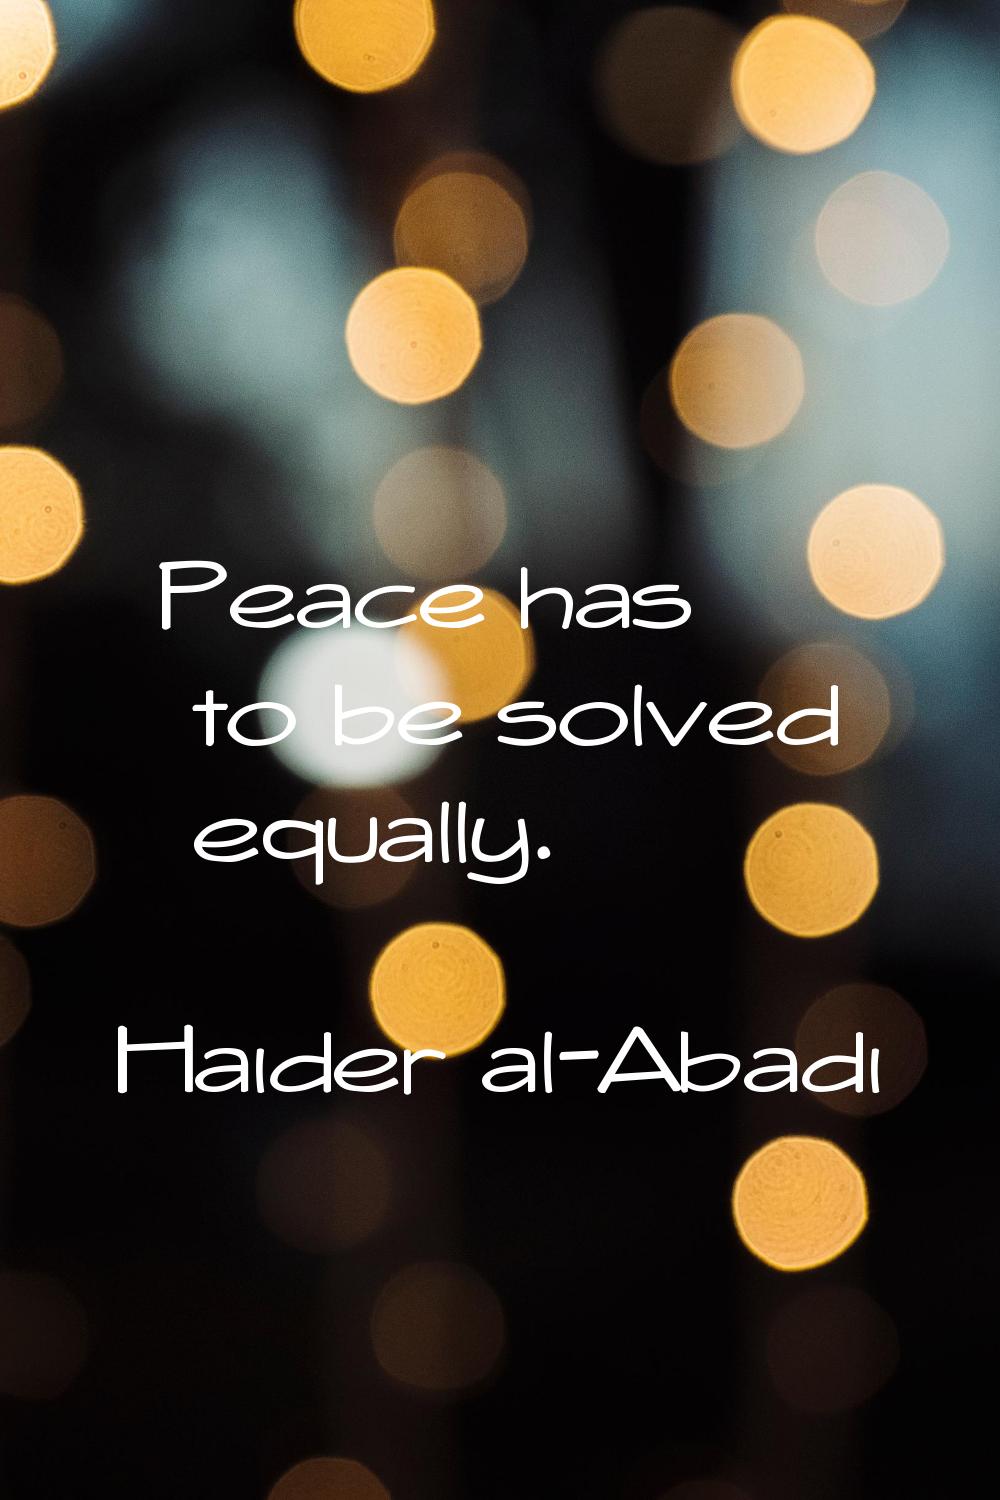 Peace has to be solved equally.